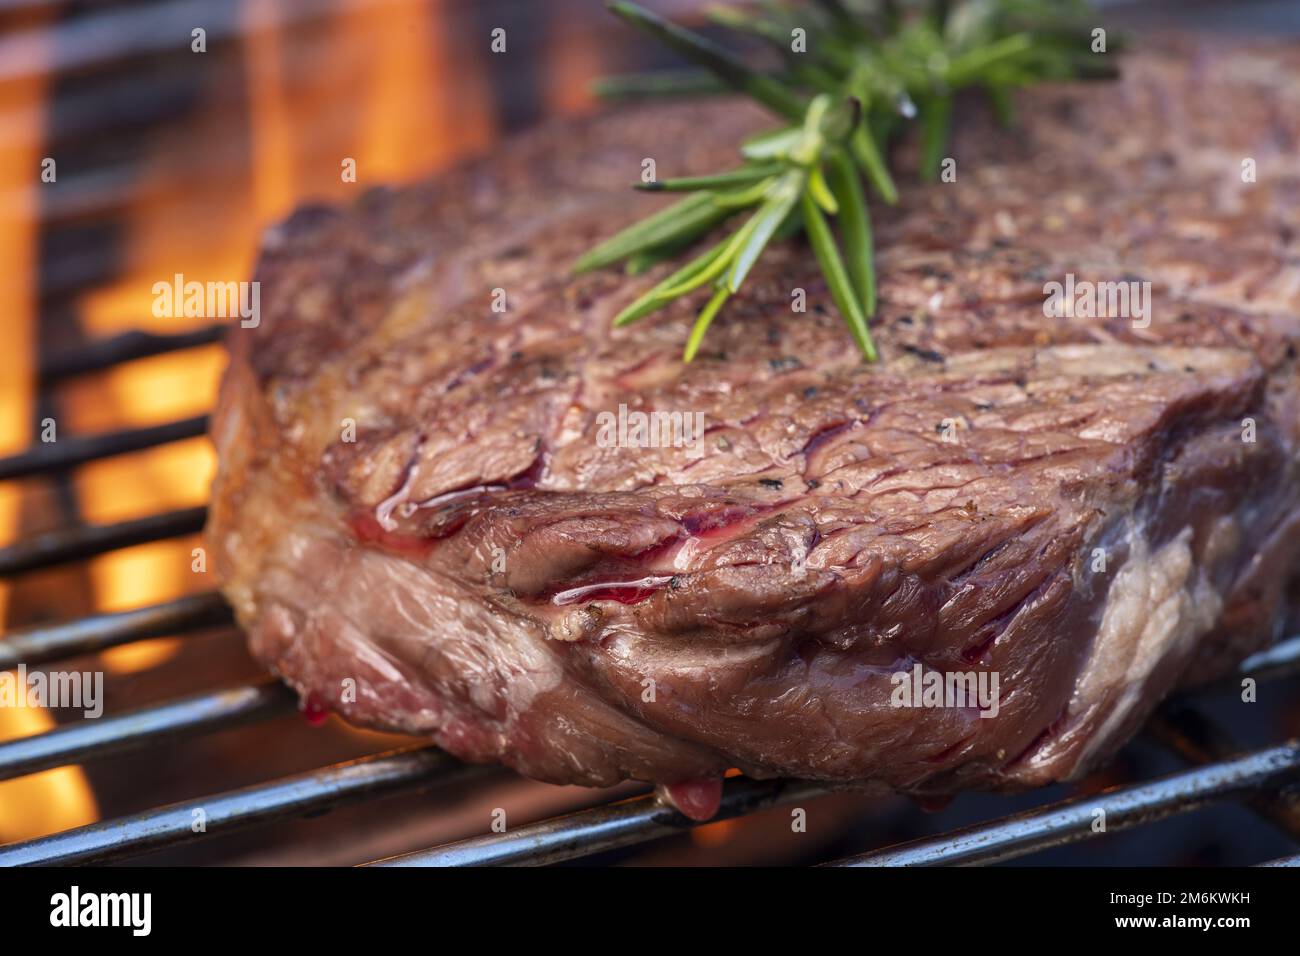 Raw steak with rosemary on the grill Stock Photo